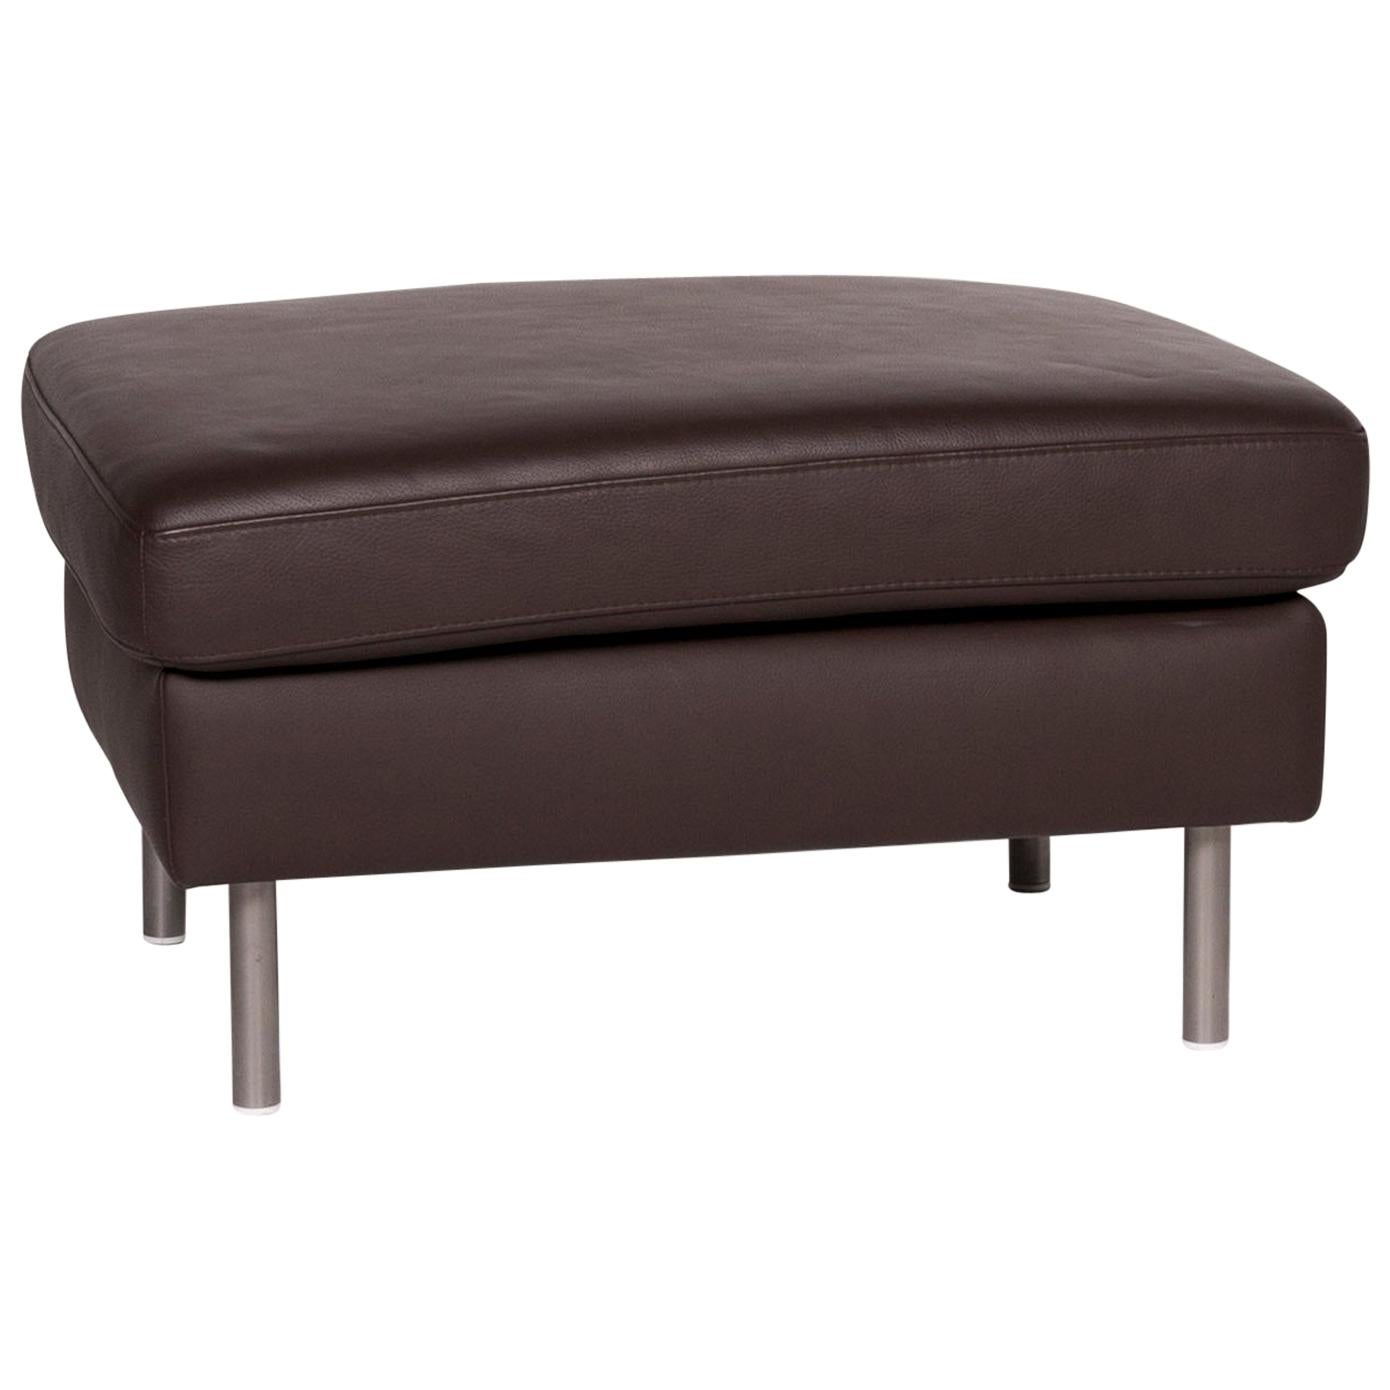 Ewald Schillig Domino Leather Stool Brown For Sale